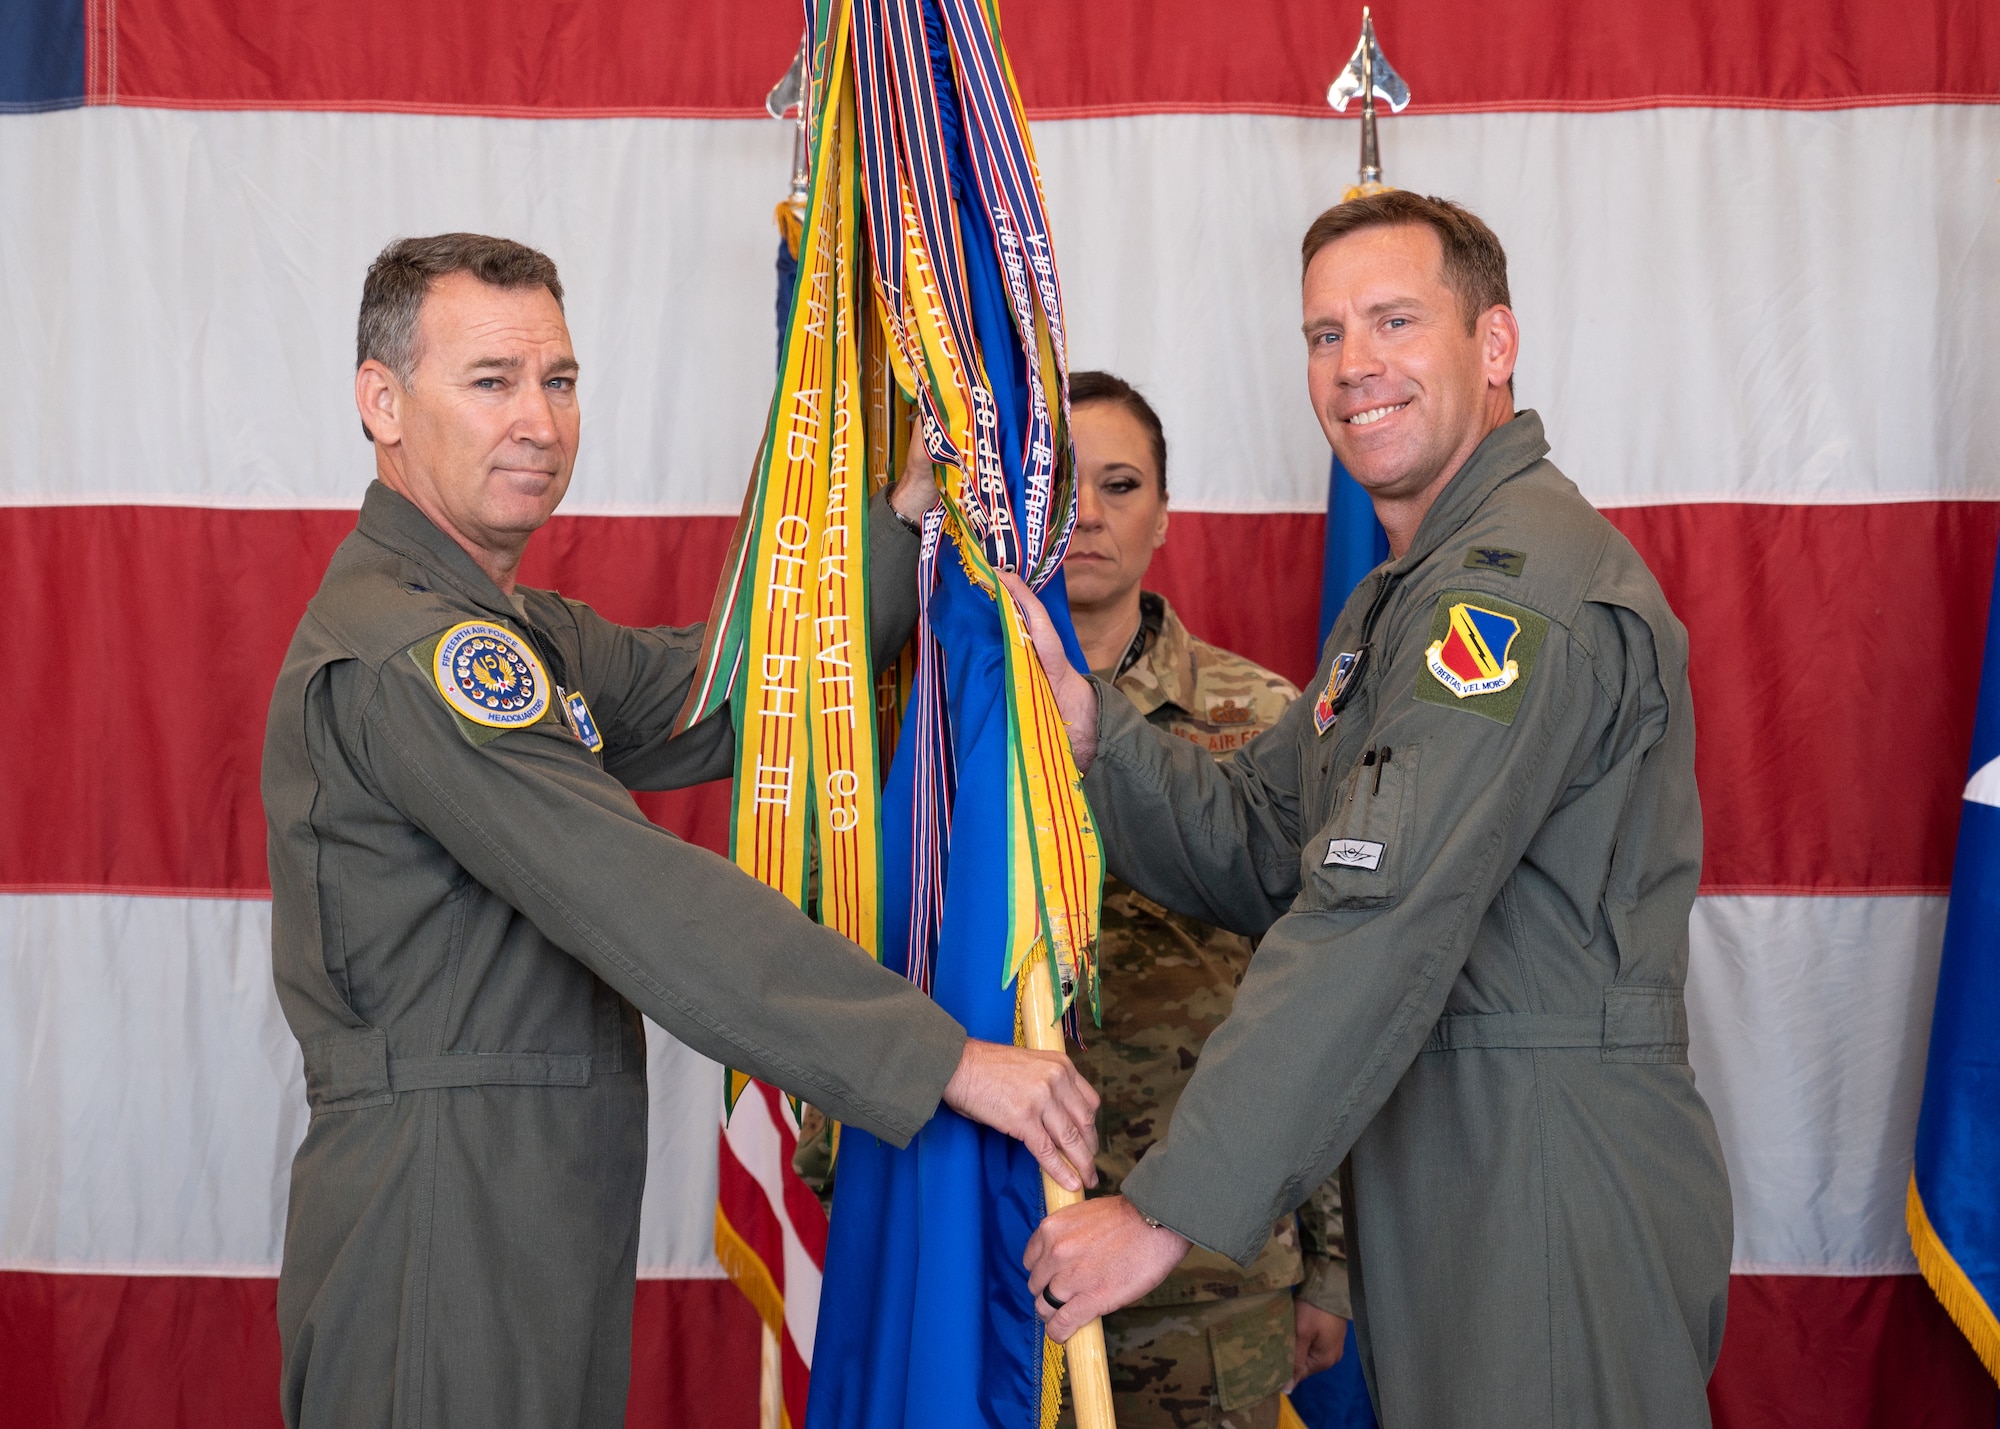 Colonel Andre takes command of 388th Fighter Wing